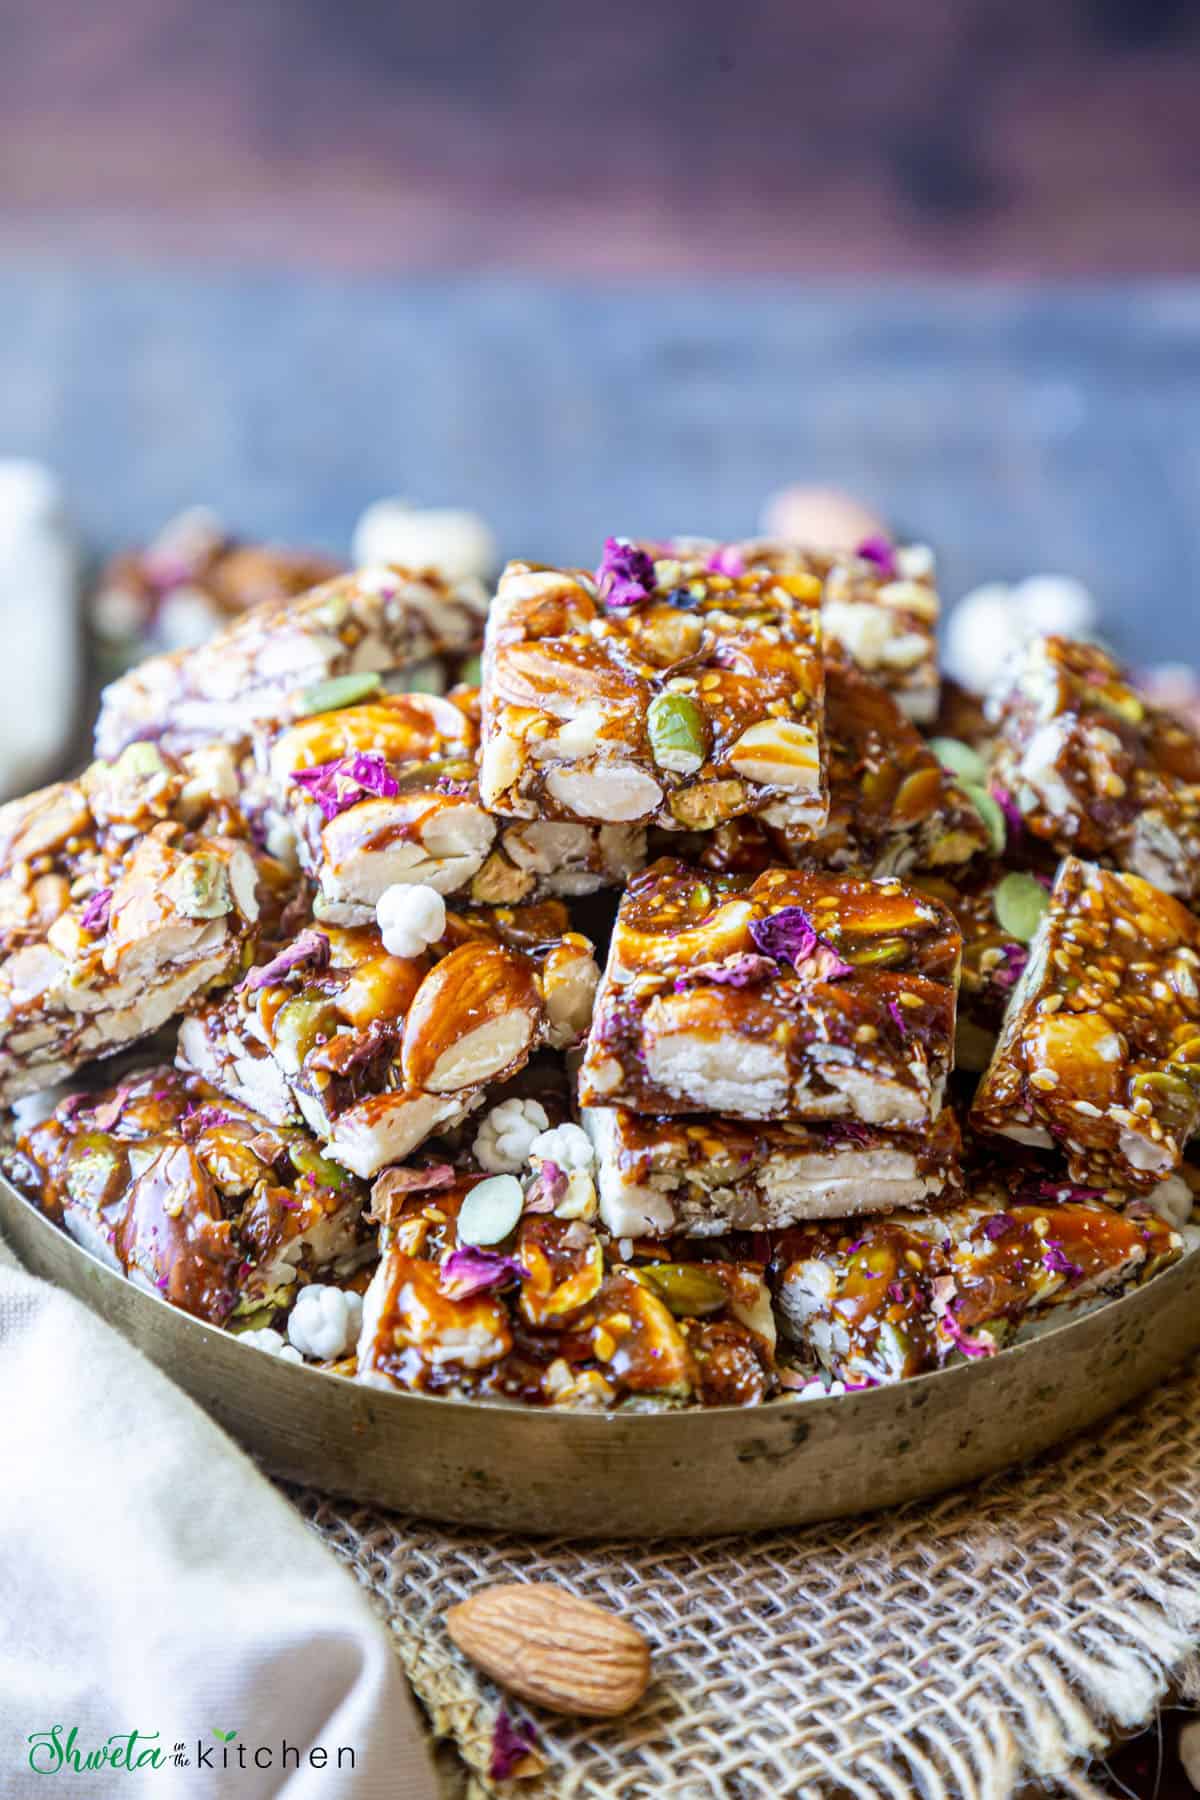 View of piled up dry fruit chikki